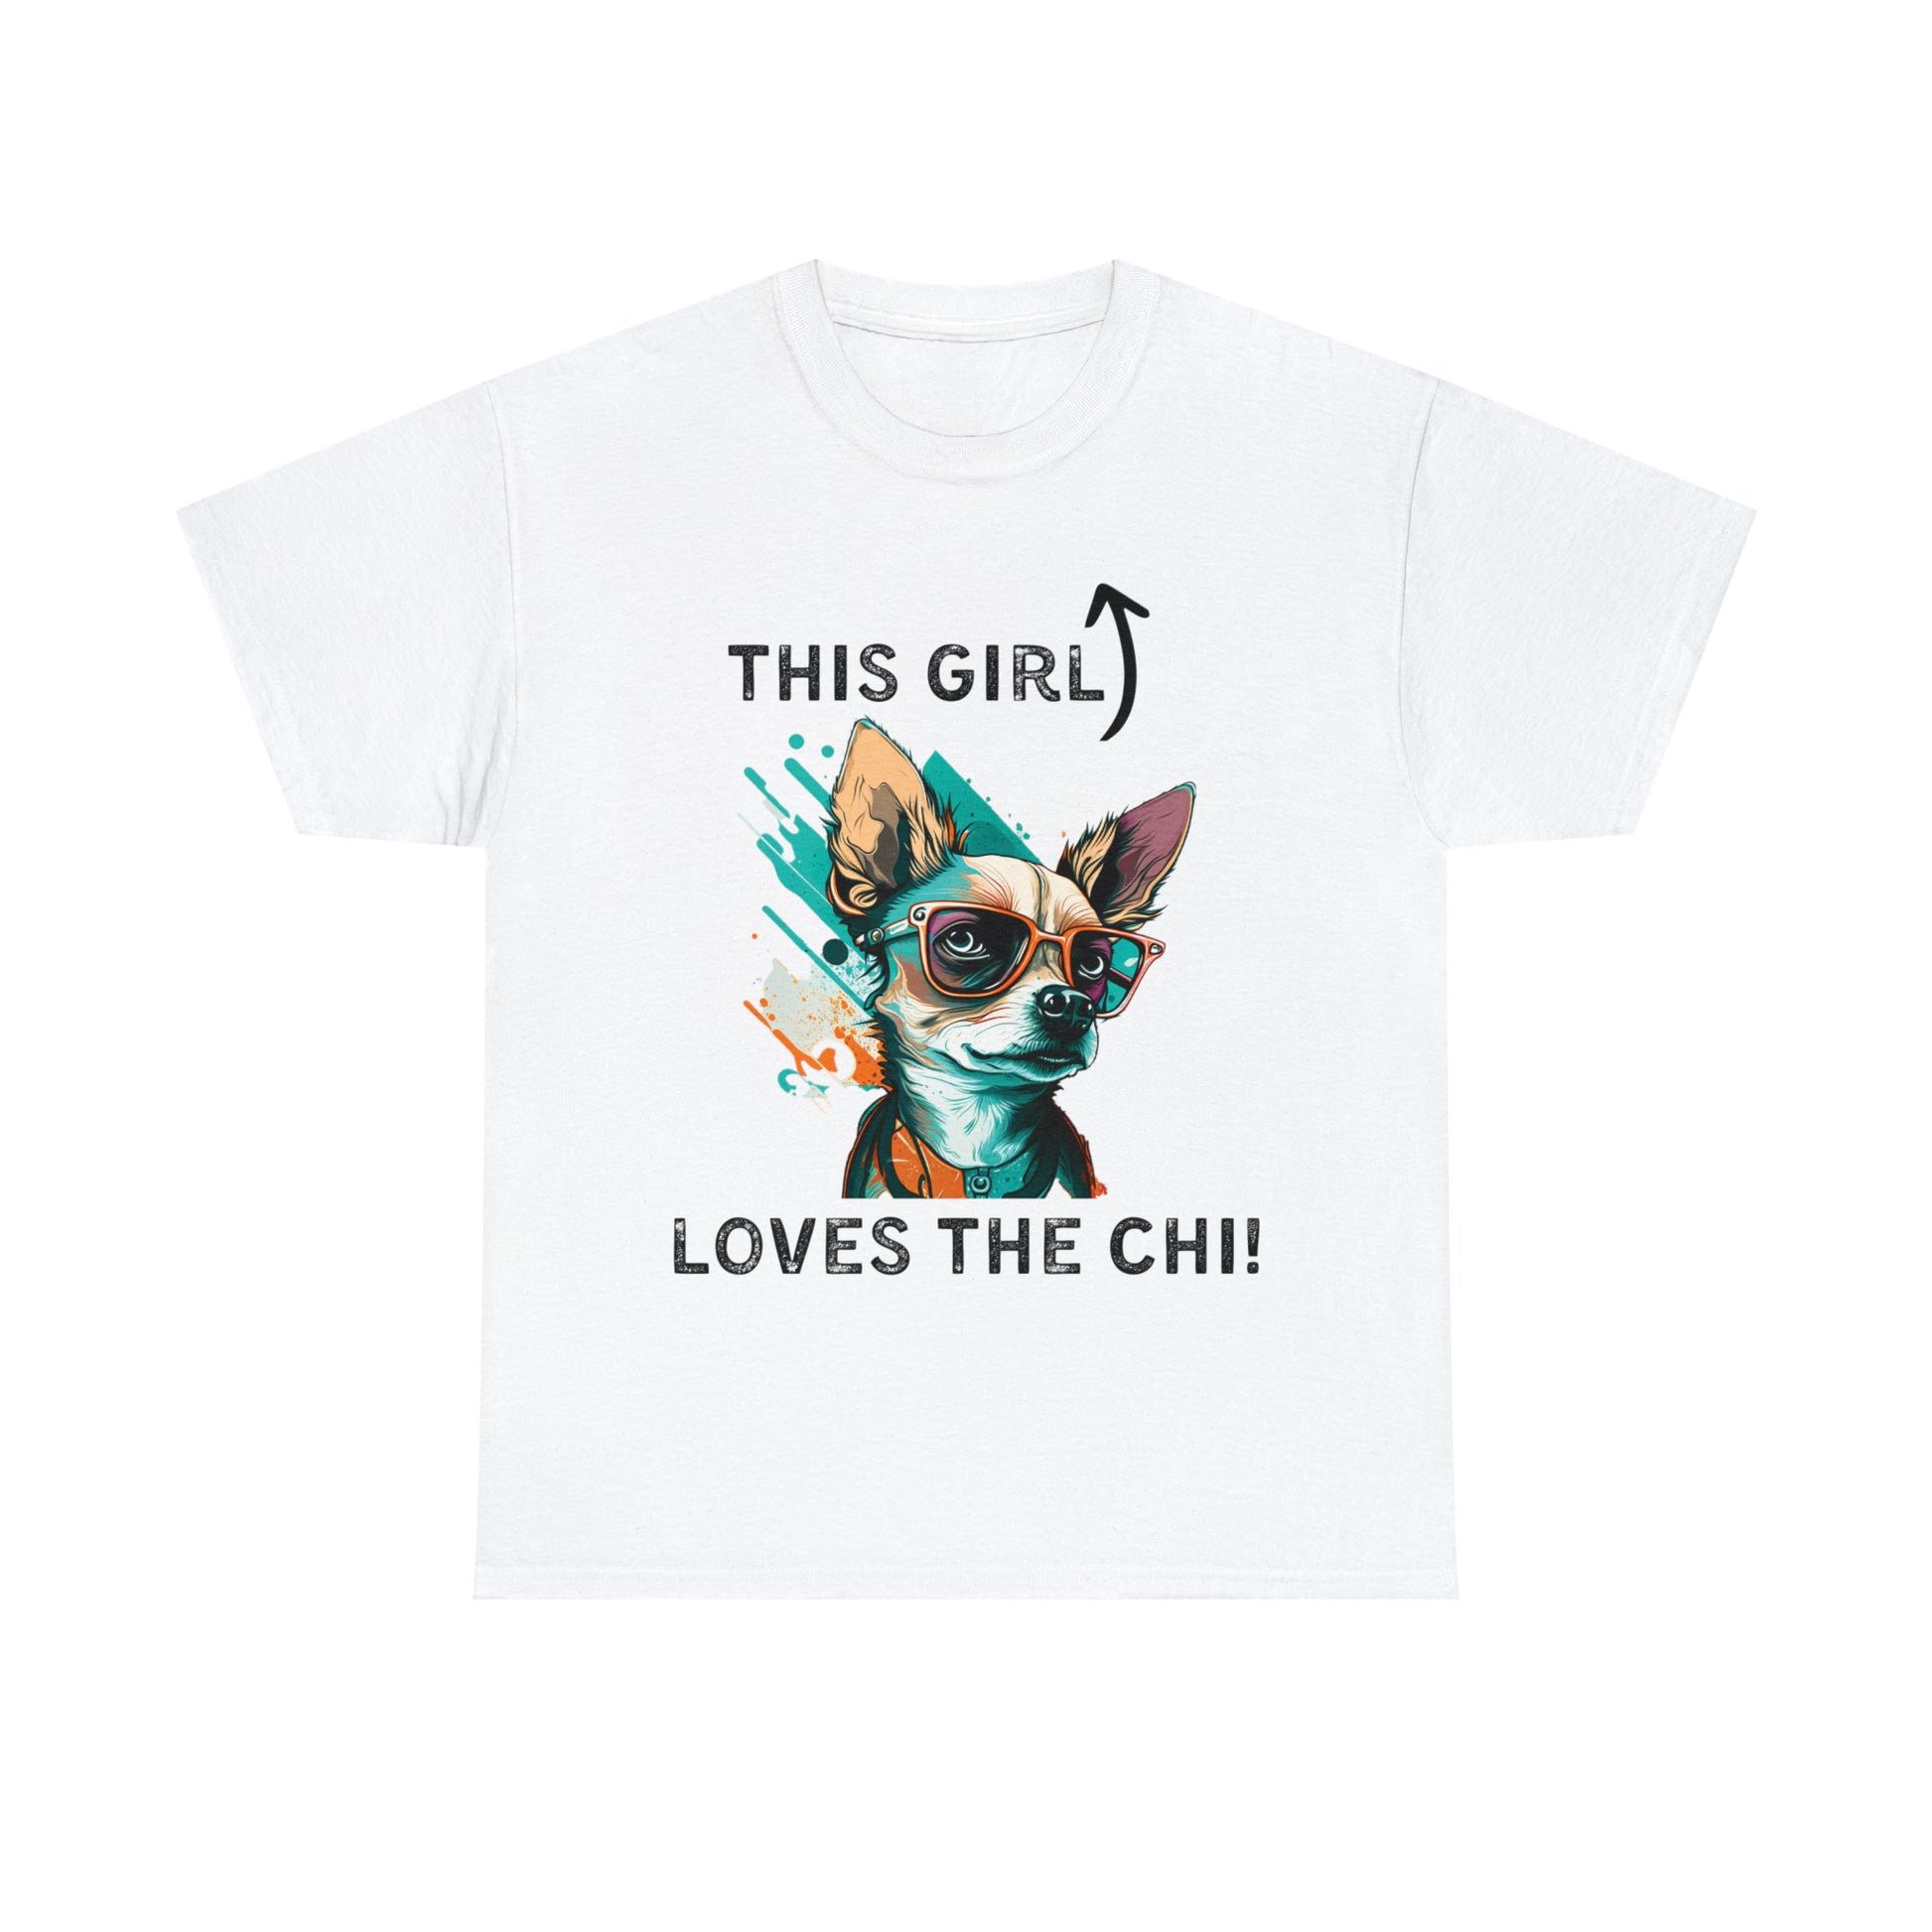 This girl loves the chi t-shirt